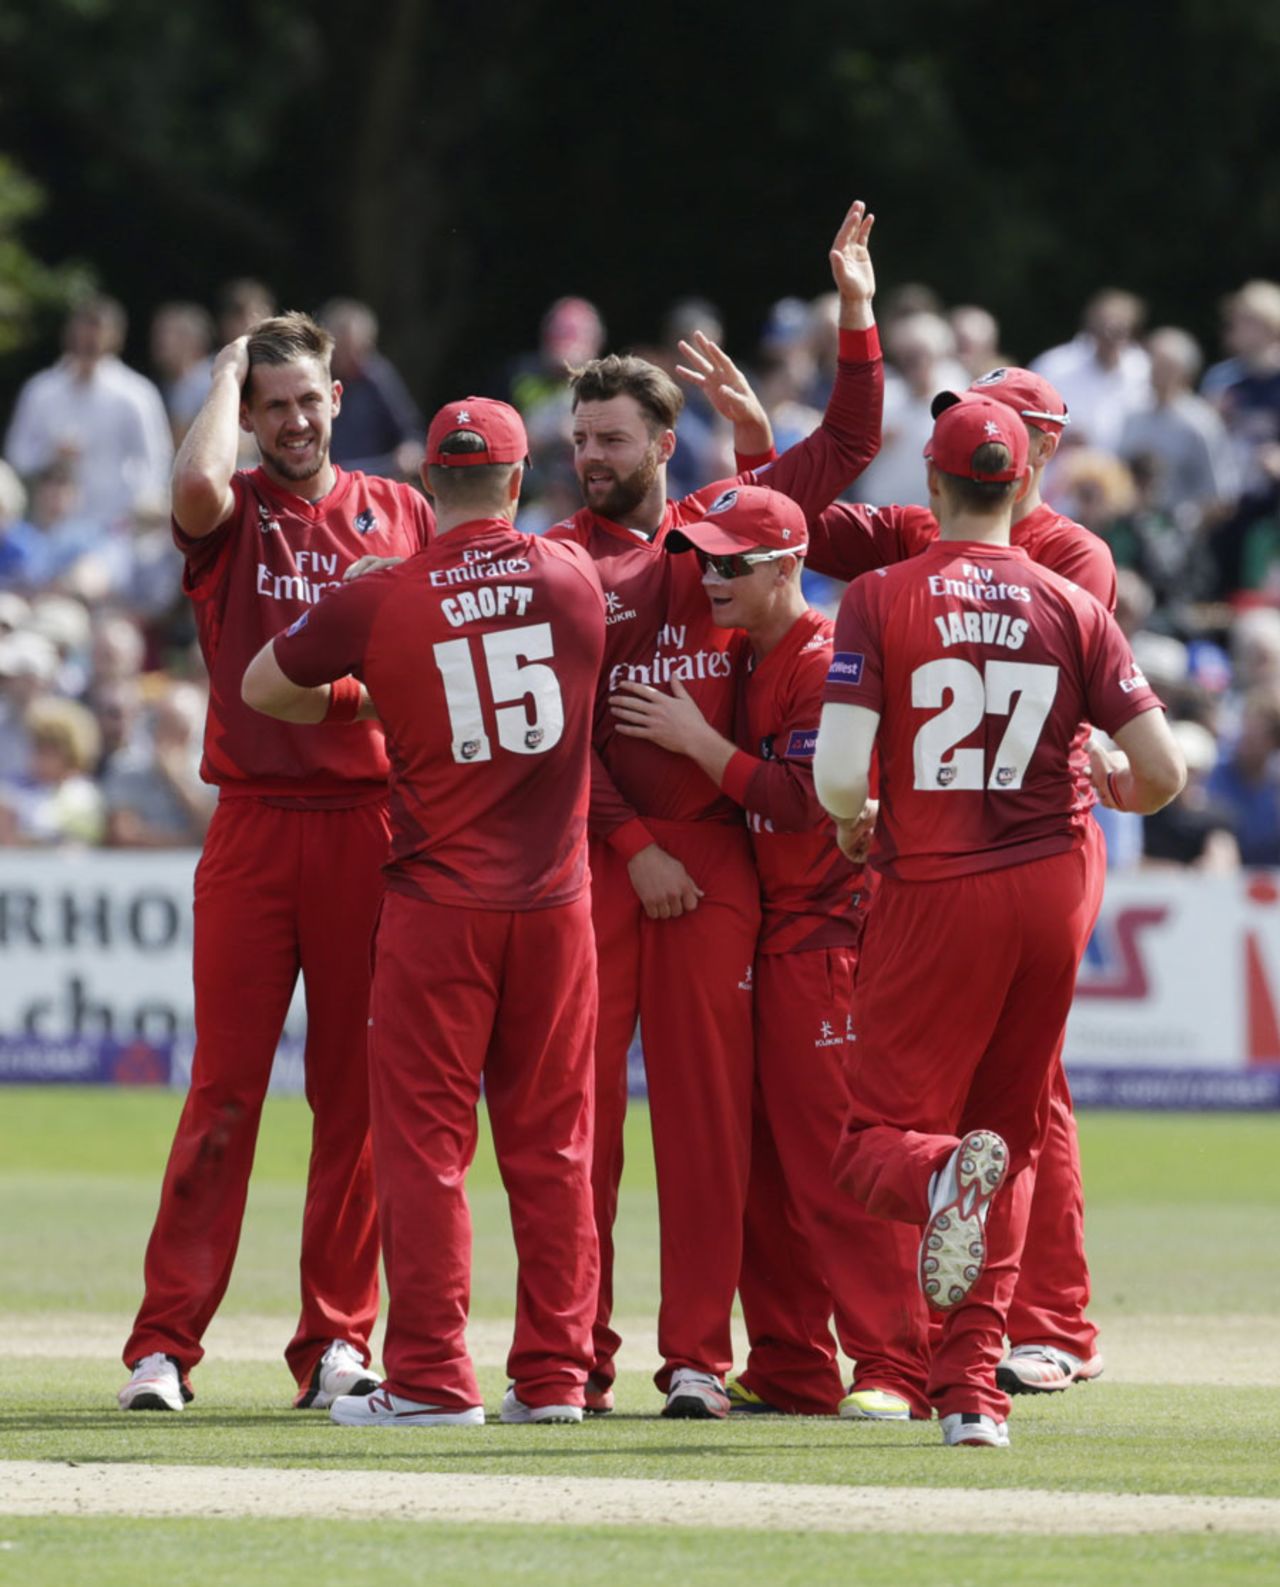 Arron Lilley picked up important wickets, Kent v Lancashire, NatWest T20 Blast quarter-final, Canterbury, August 15, 2015